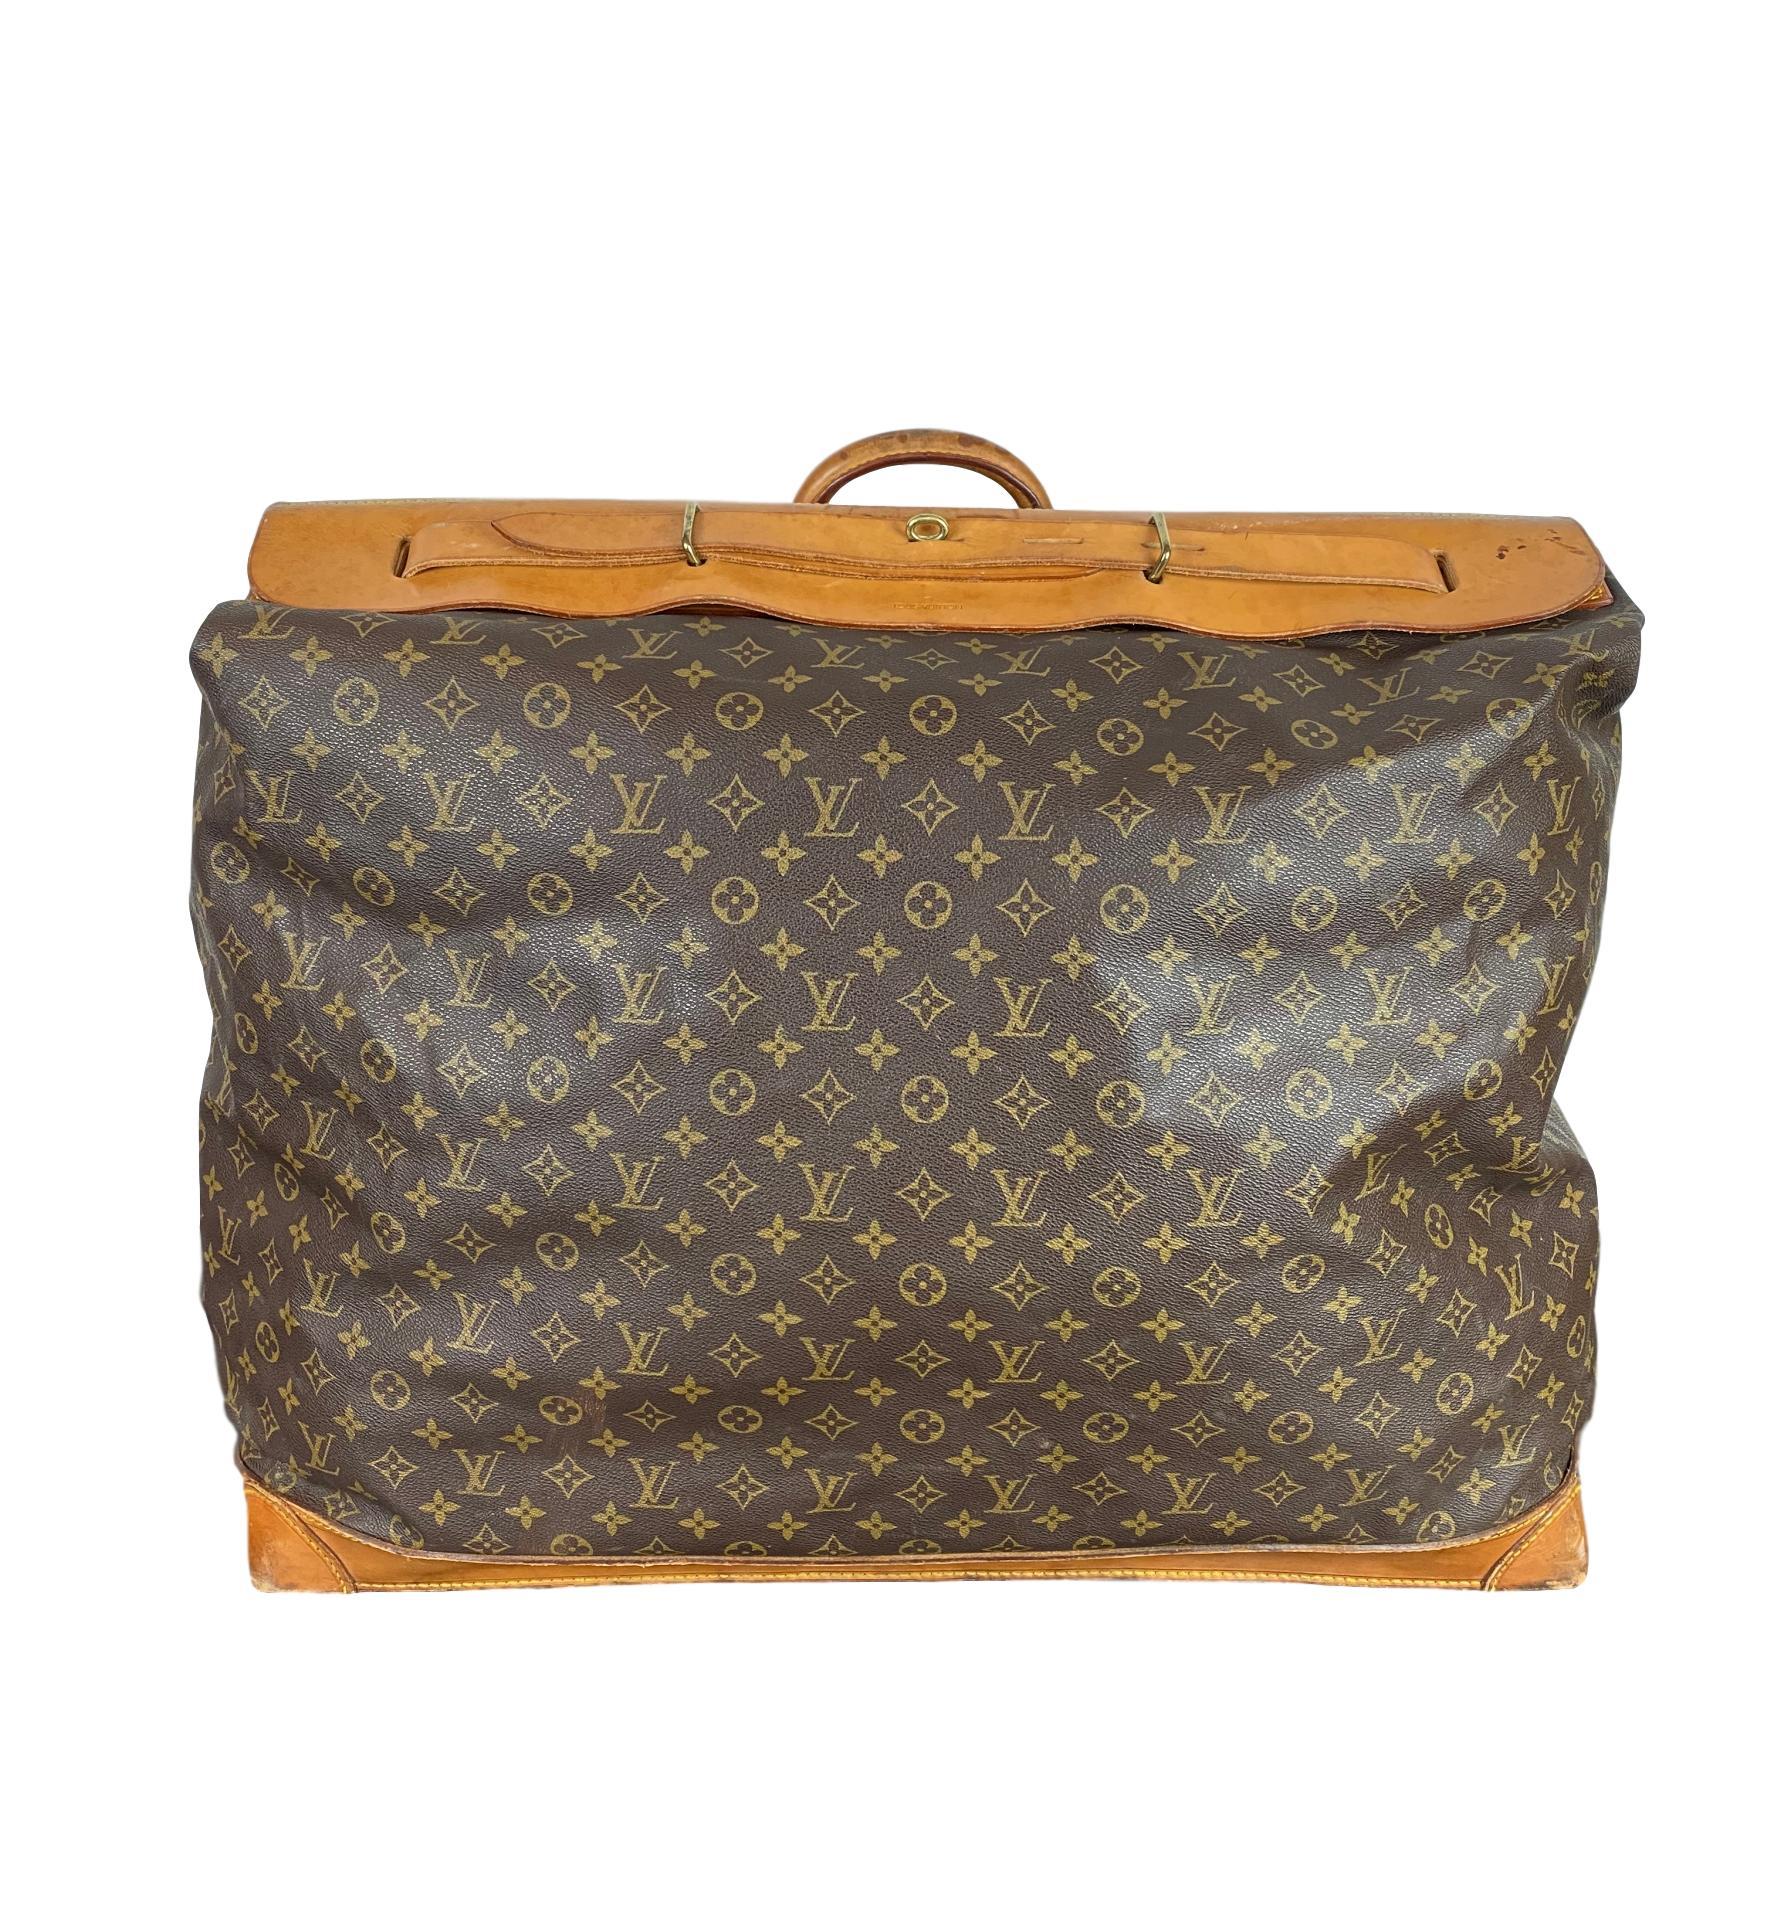 Vintage Louis Vuitton Large Monogram Steamer Travel Bag 55, France 1991. This vintage bag comes in the classic Louis Vuitton Monogram canvas with rolled top vachetta handles, making it a easy carry on item for both men and women. Interior of bag